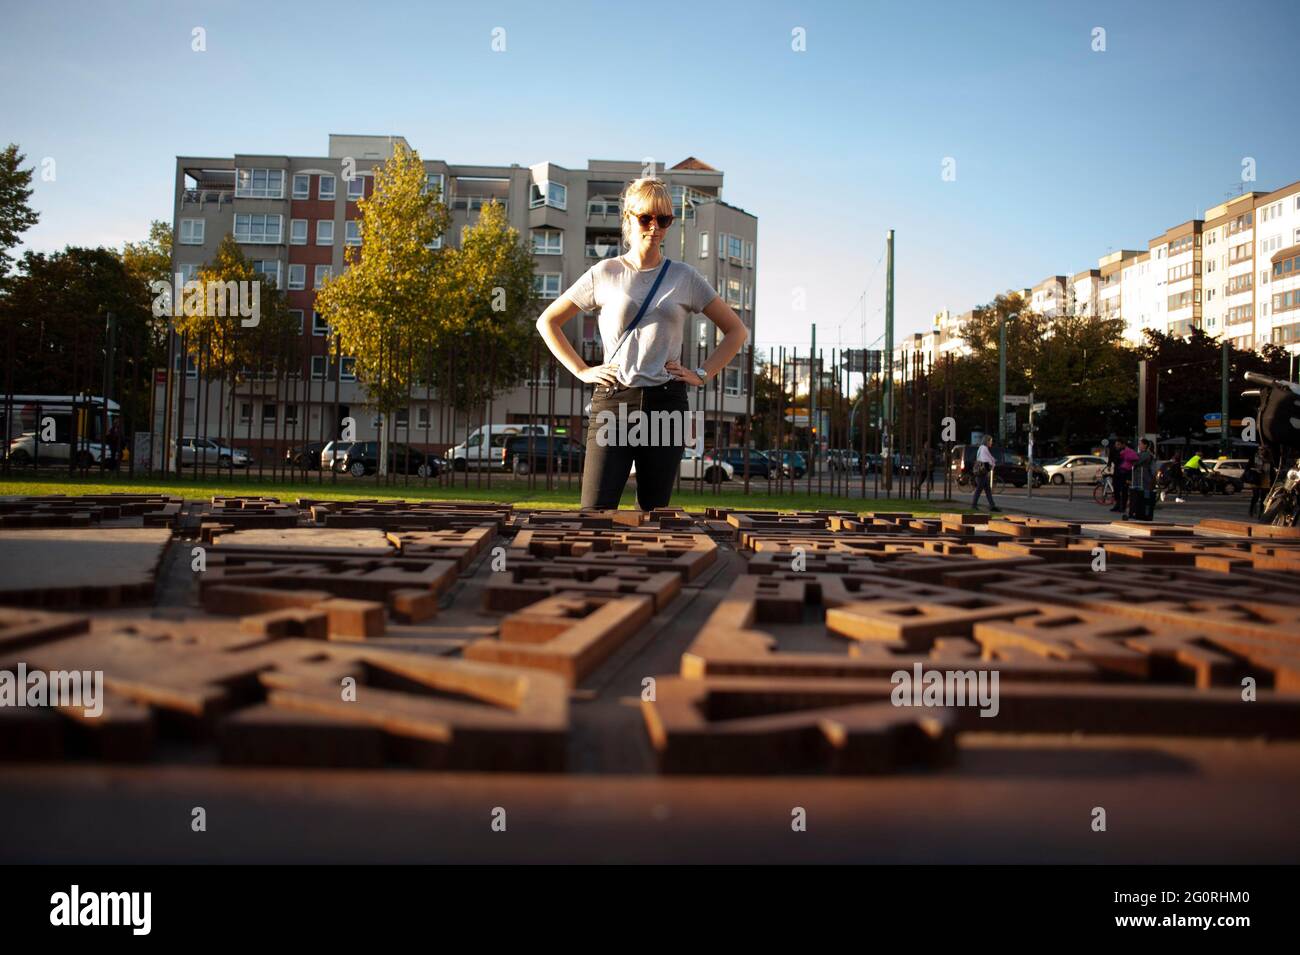 A woman stands in a park in Berlin, Germany looking at a 3D map of the area and seeing where the Berlin Wall divided the city. Stock Photo